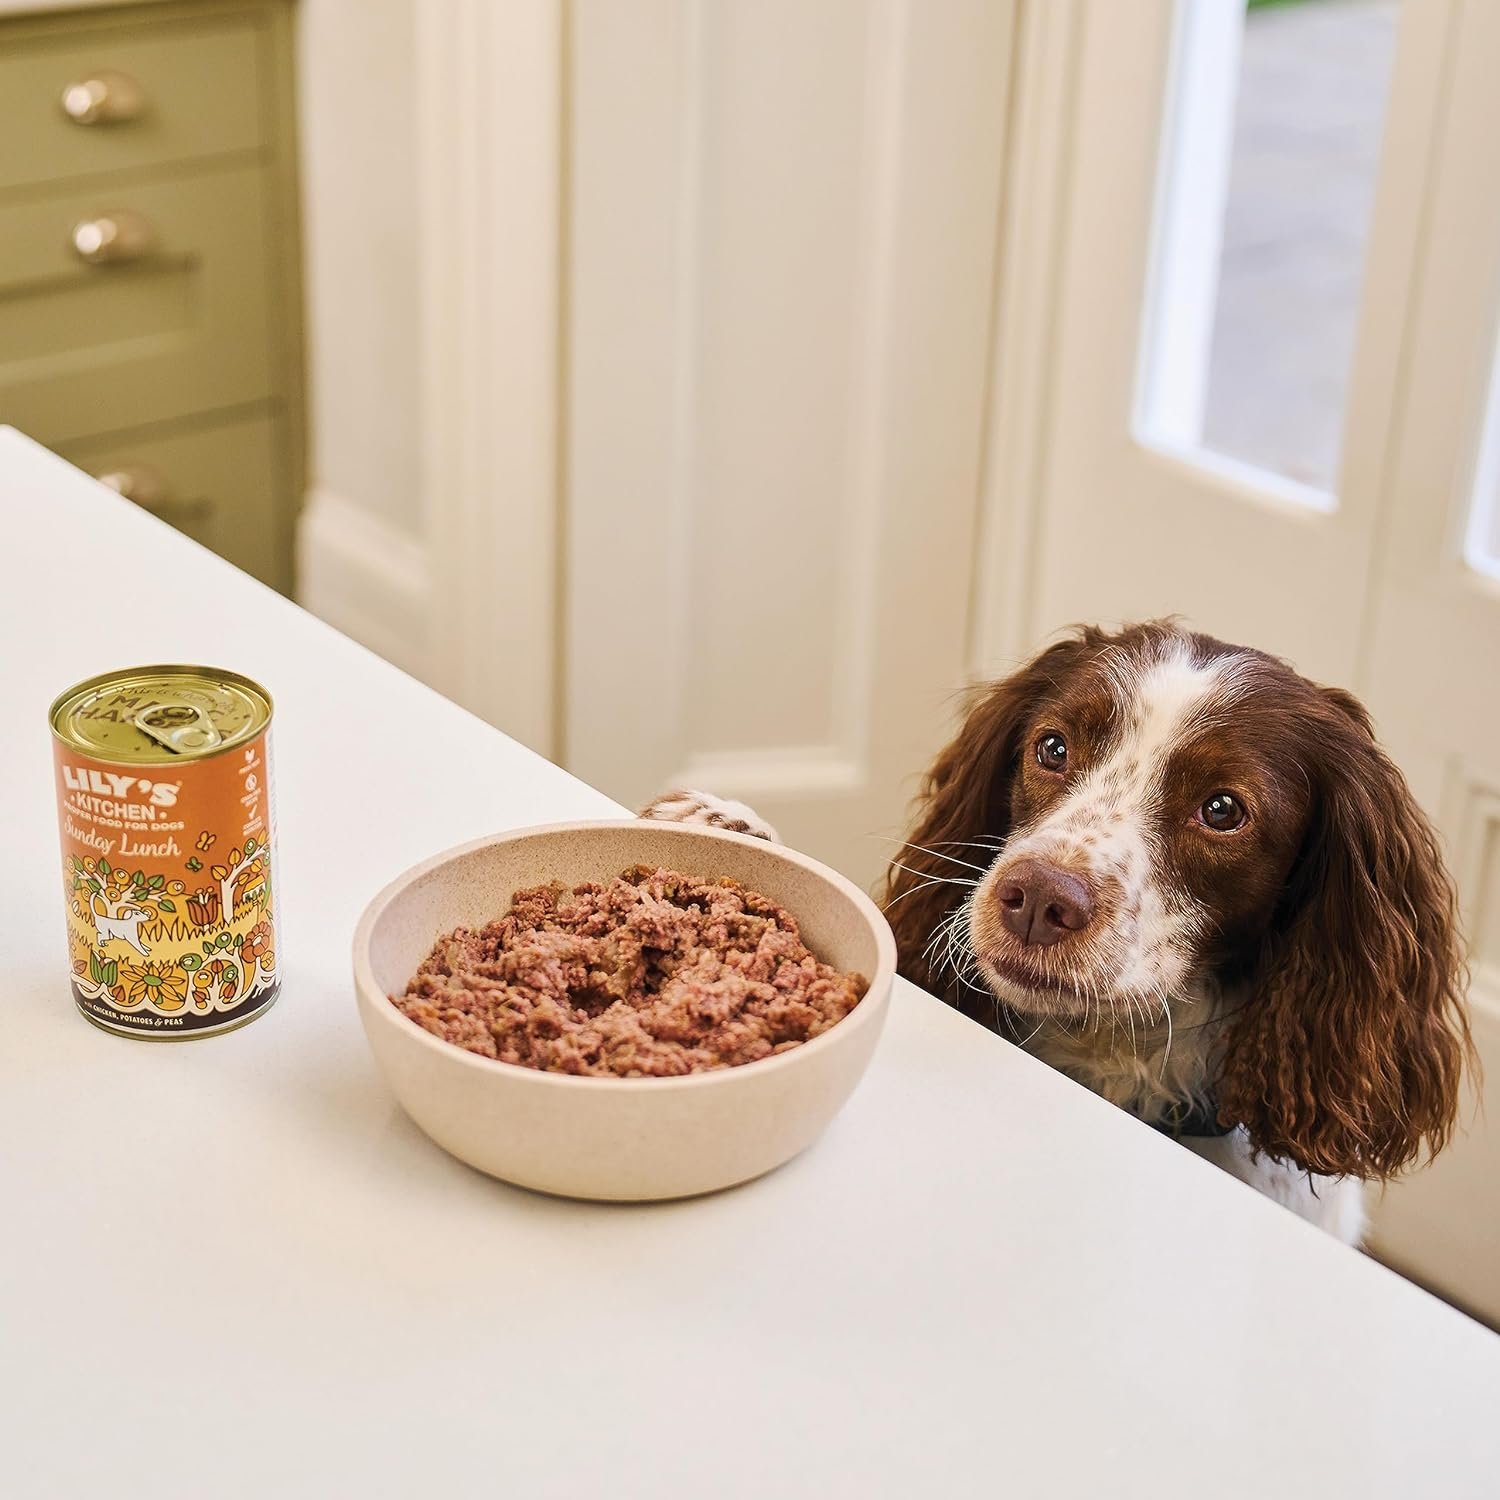 lilys kitchen wet dog food tins review